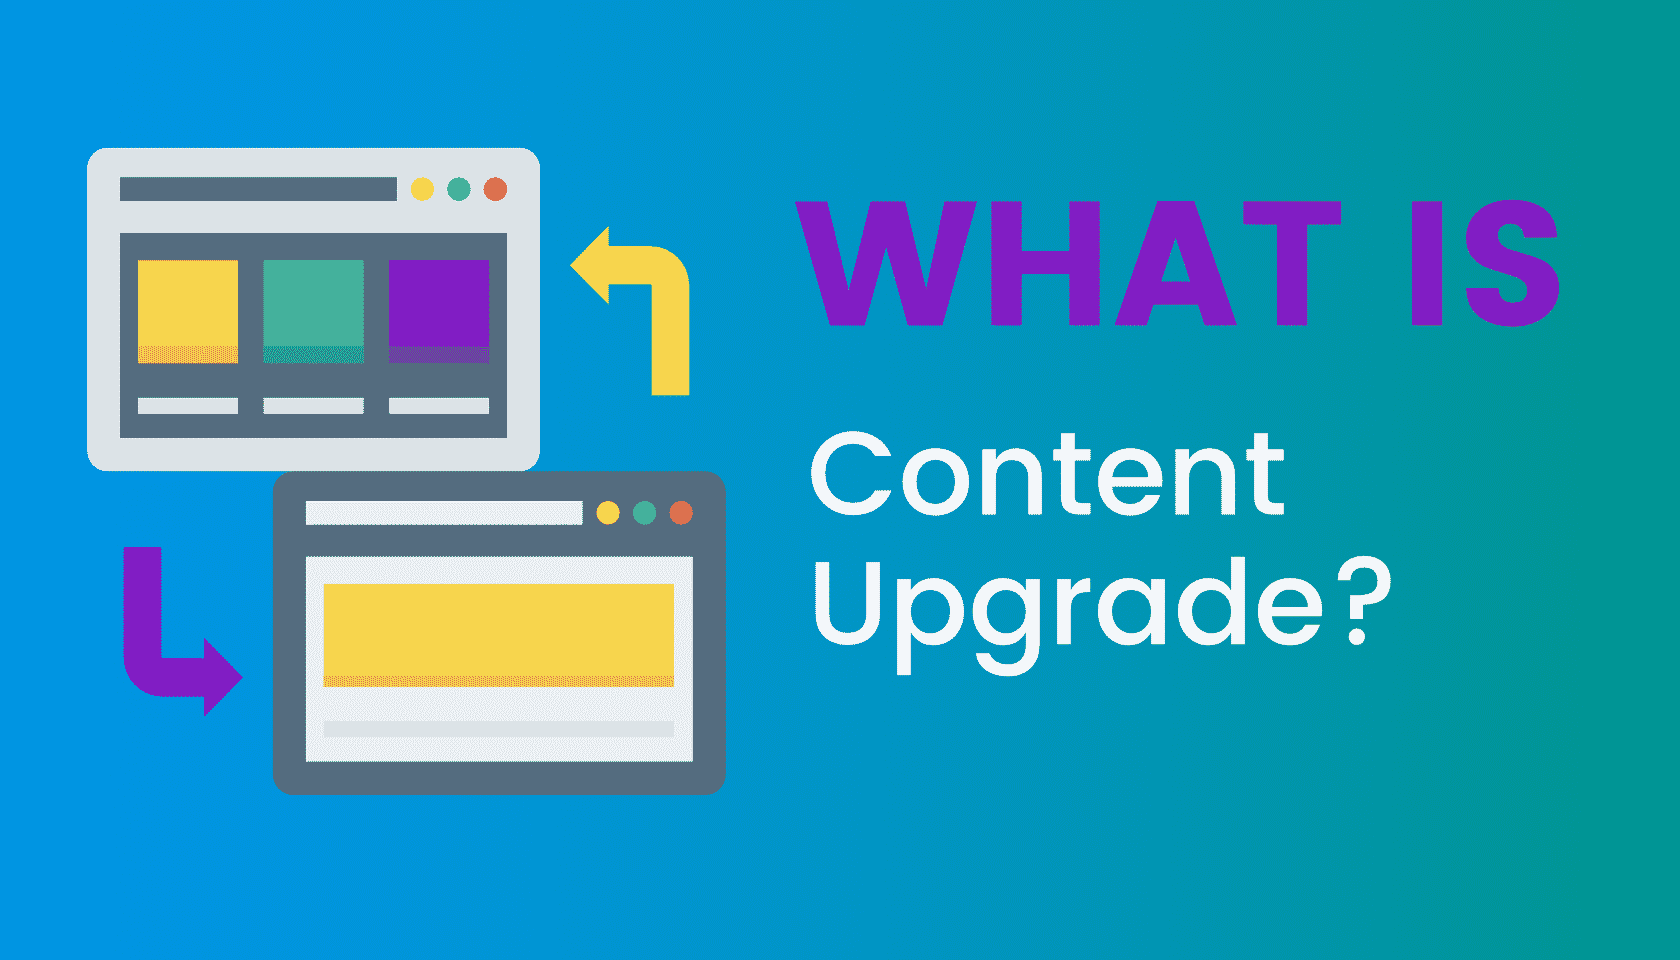 What is: Content Upgrade